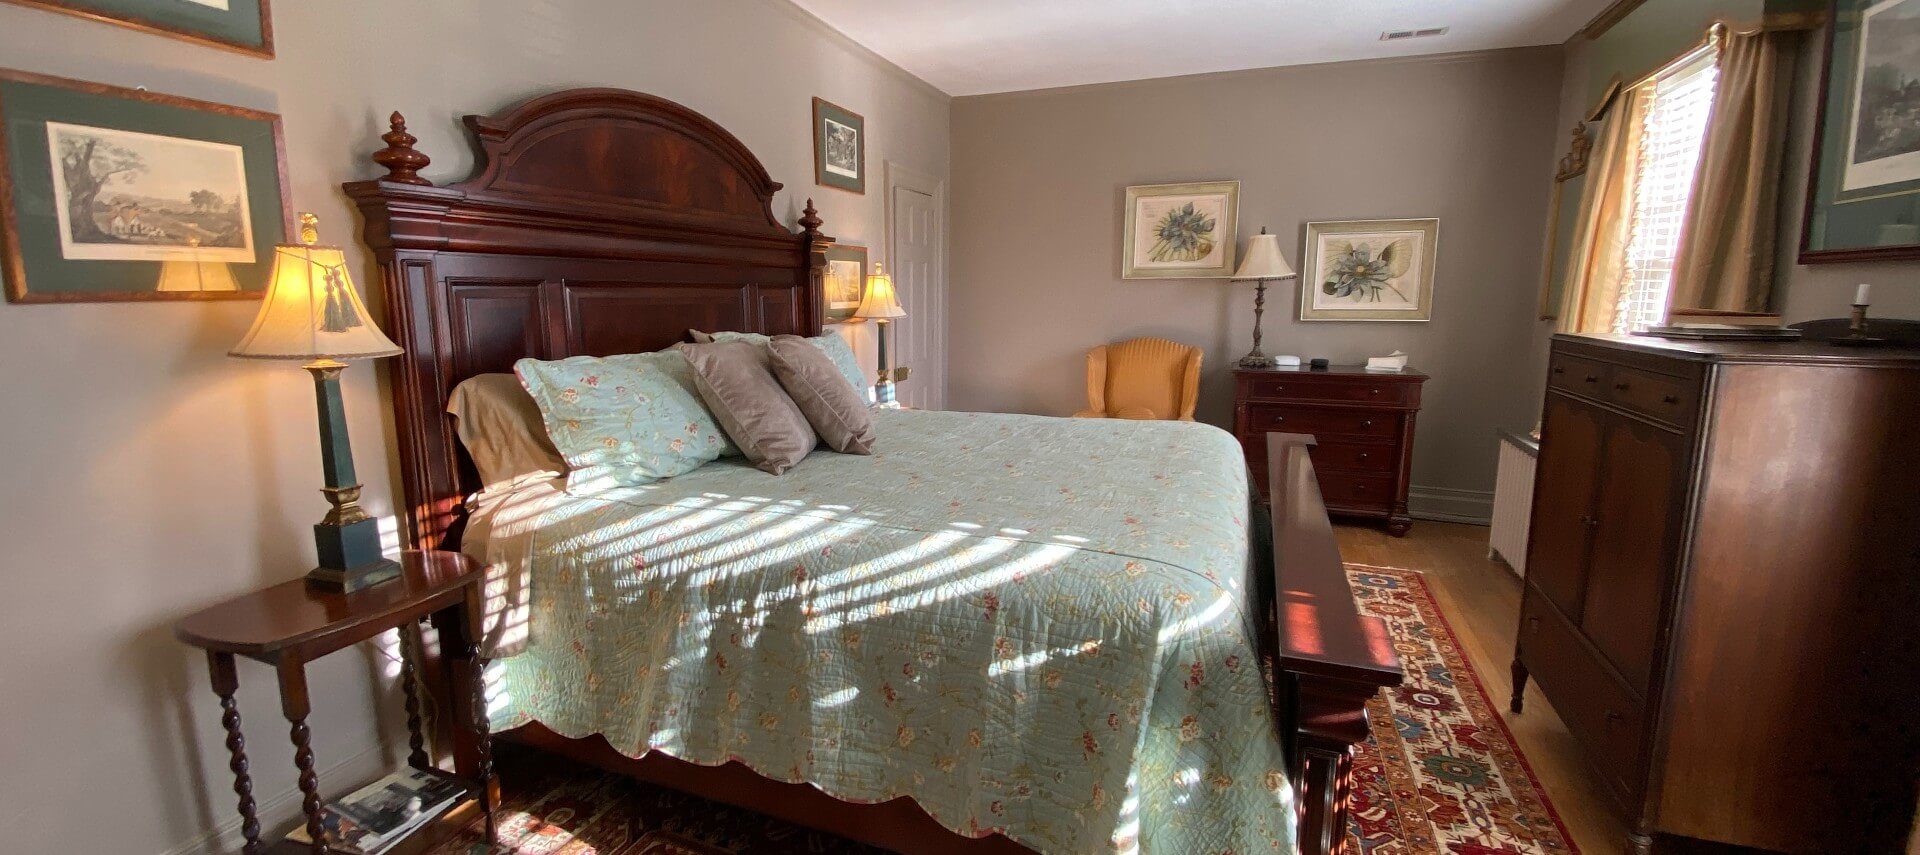 Beautiful spacious bedroom with king bed, mahogany headboard, side tables with lamps. decorative rug and hardwood floors